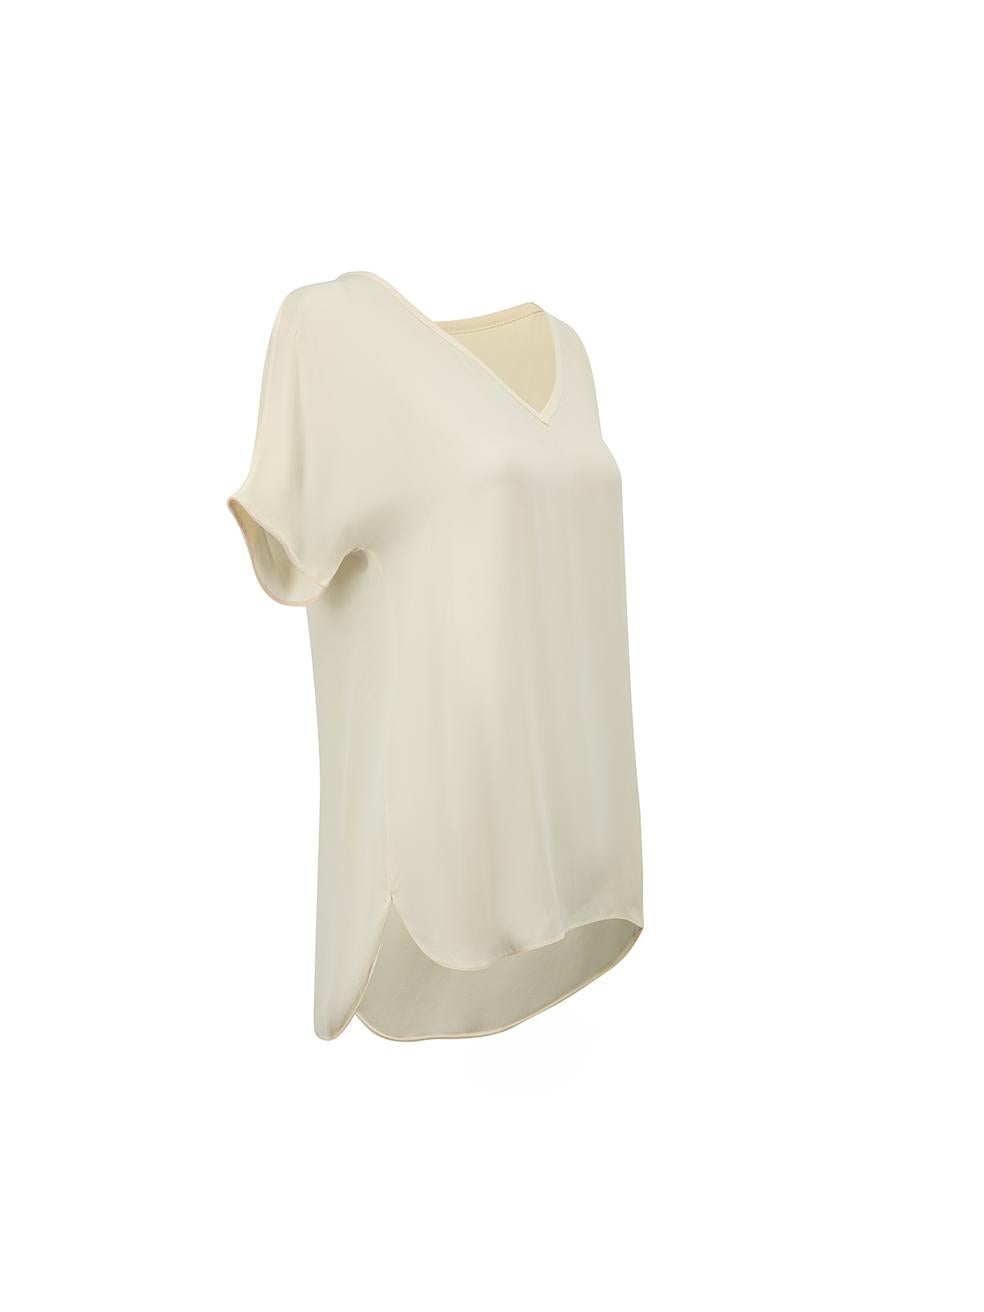 CONDITION is Good. General wear to top is evident. Moderate signs of wear to fabric with pilling at underarms and hem as well as small tear at bottom of left side seam on this used Loro Piana designer resale item.



Details


Ecru

Silk

Top

Short